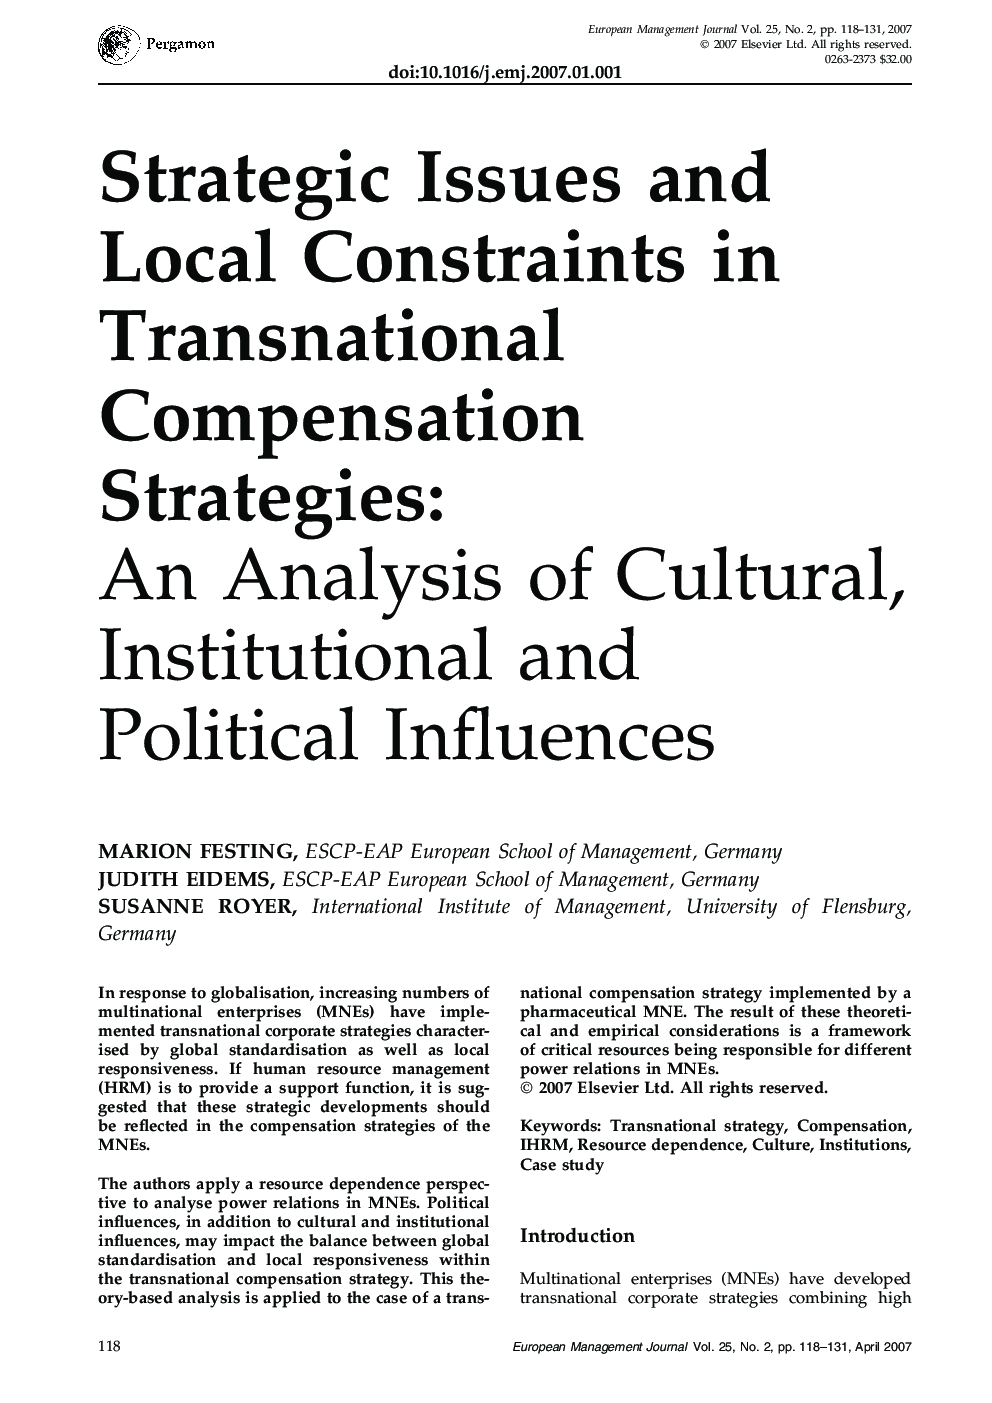 Strategic Issues and Local Constraints in Transnational Compensation Strategies:: An Analysis of Cultural, Institutional and Political Influences